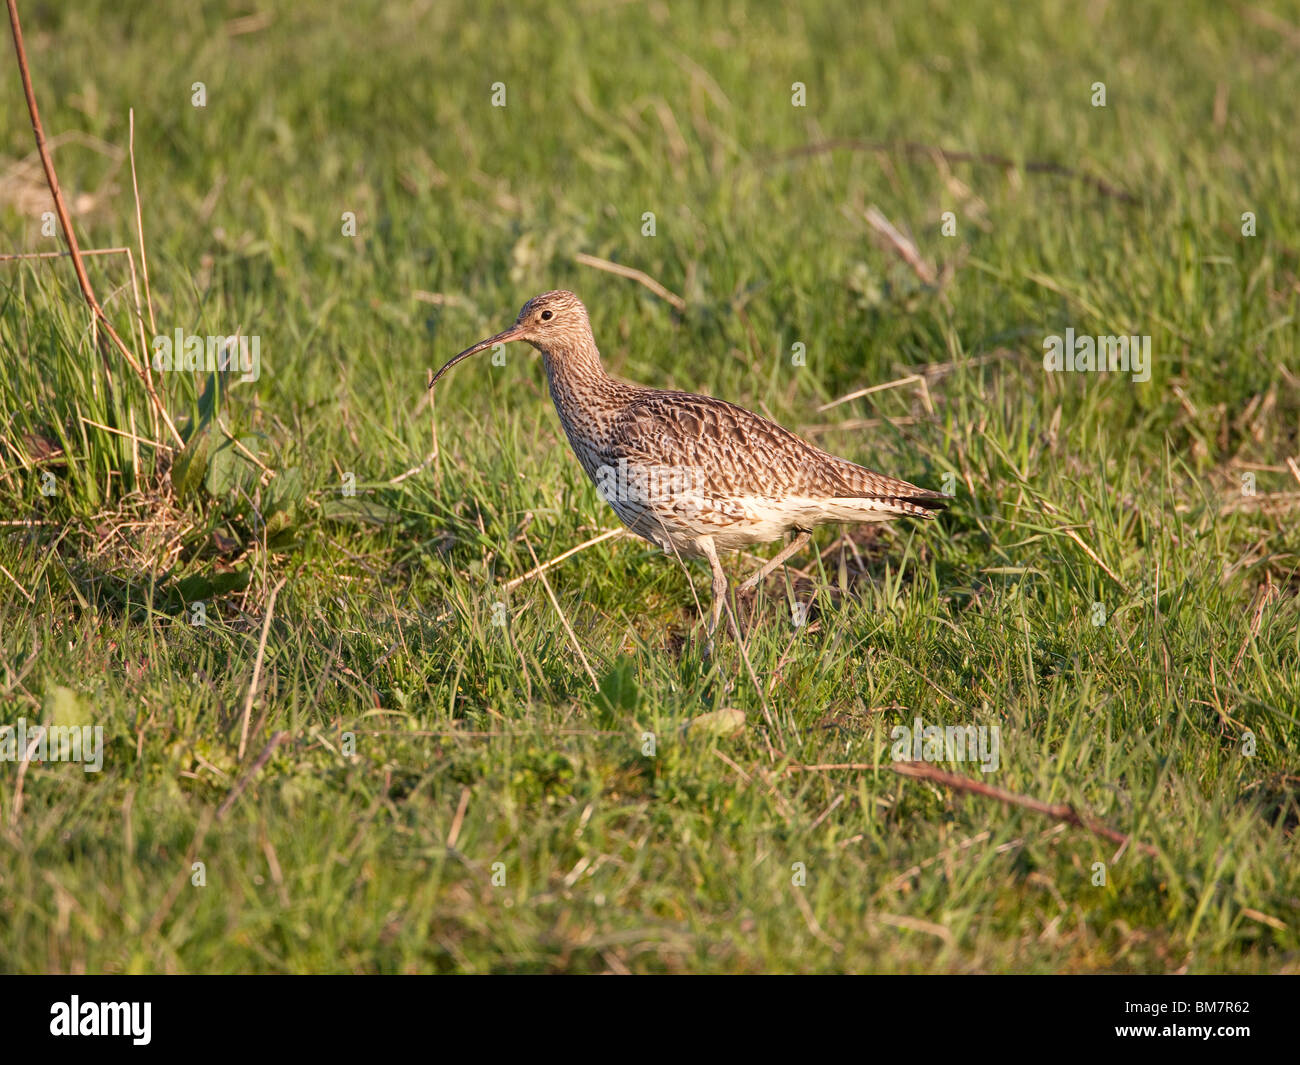 Curlew Numenius Arquata walking on grasslands in the late spring light with prominent curved bill Stock Photo